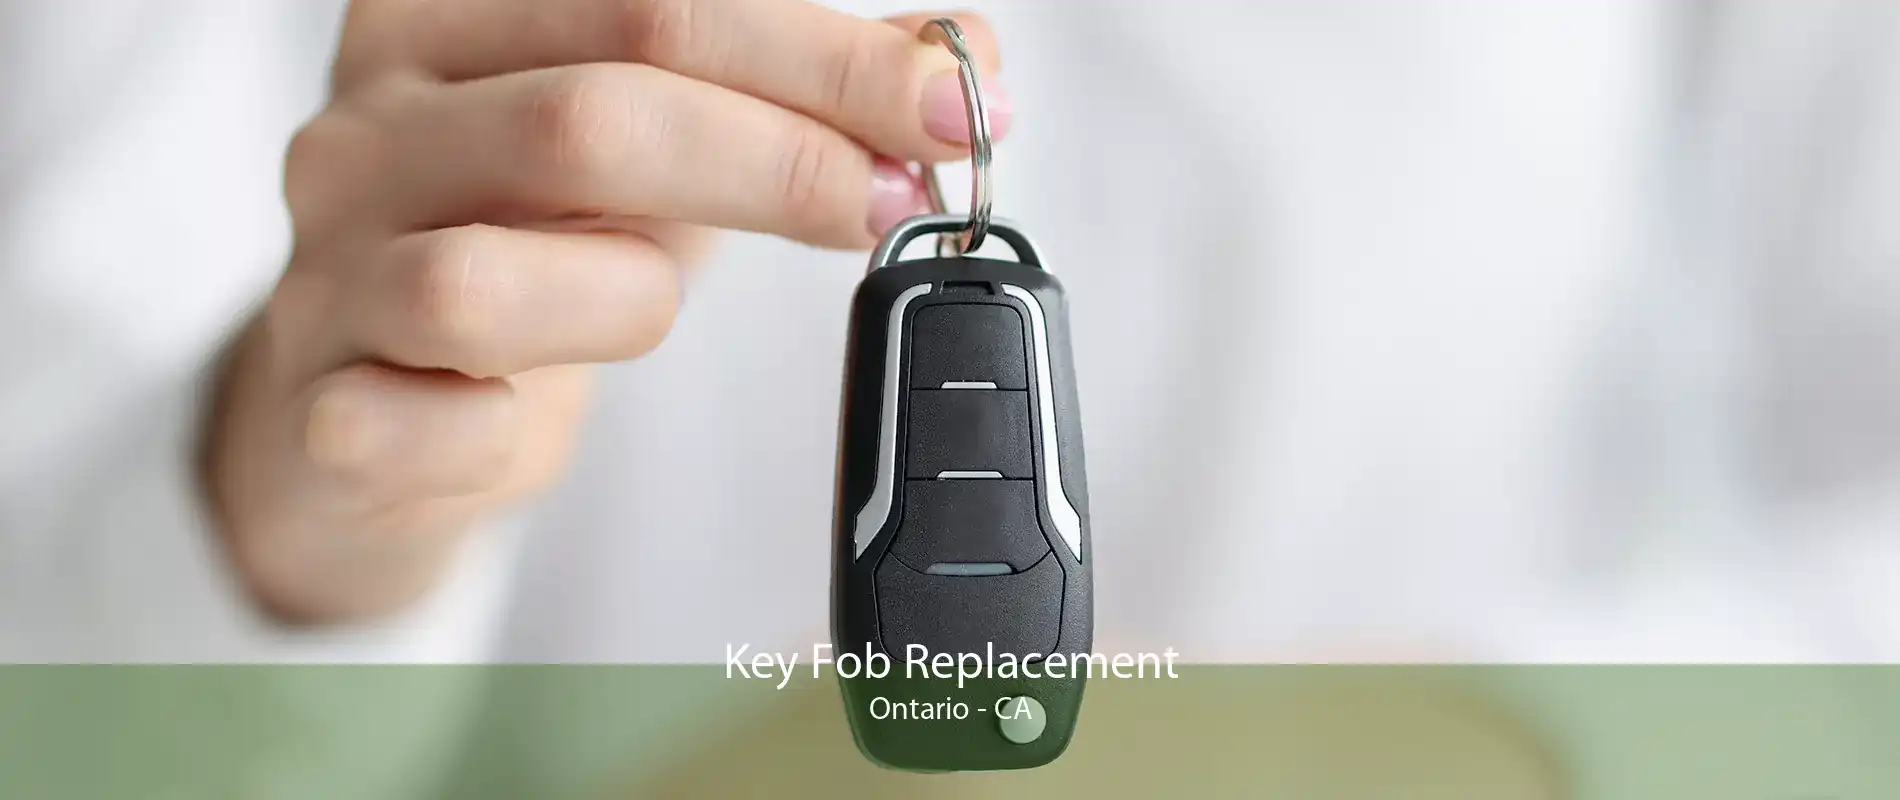 Key Fob Replacement Ontario - CA